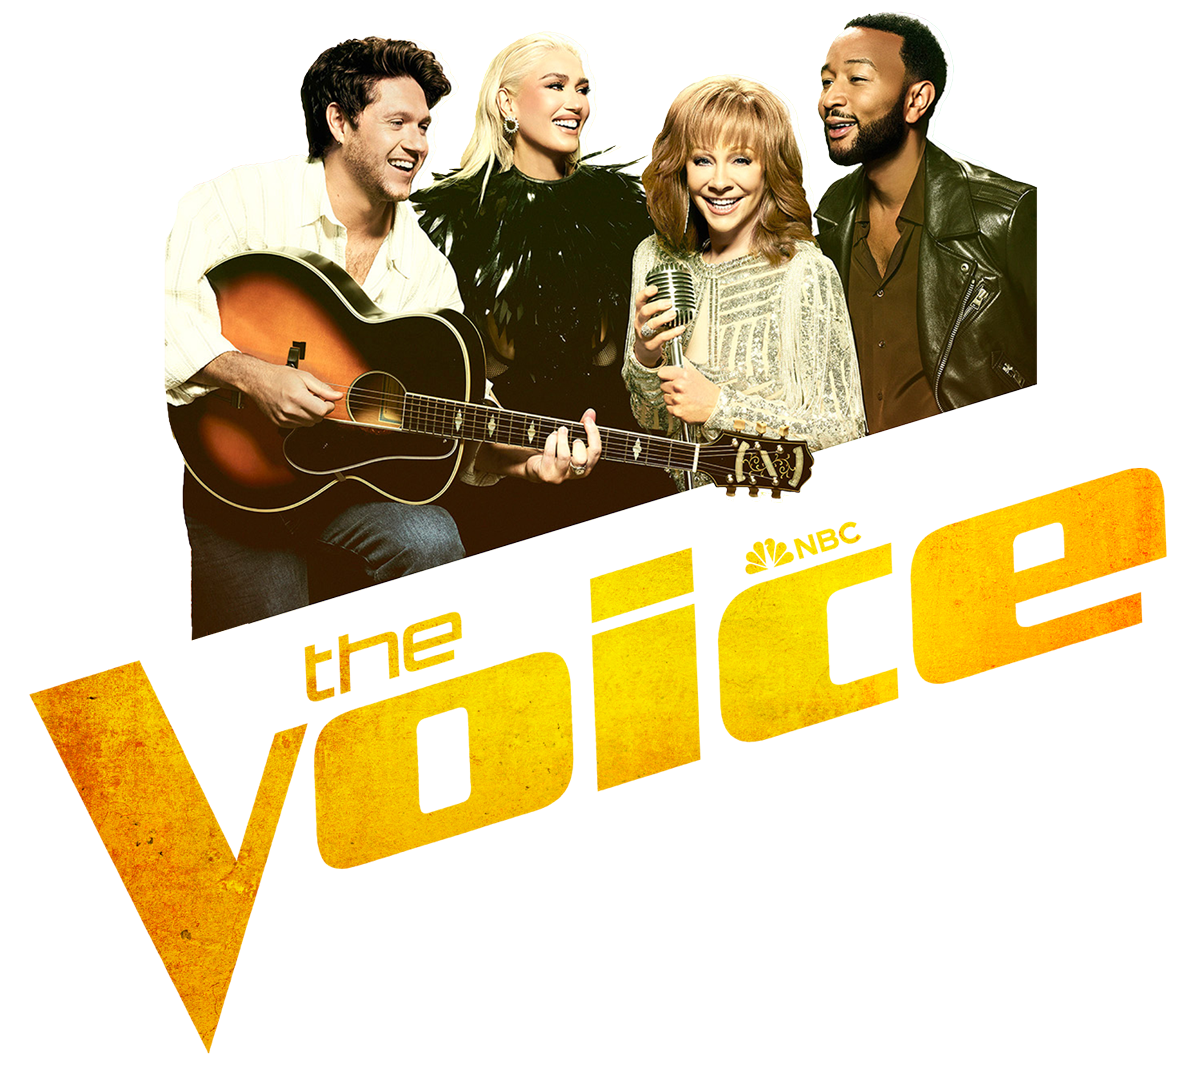 Audition for The Voice  NBC The Voice - Official Casting & Audition Site